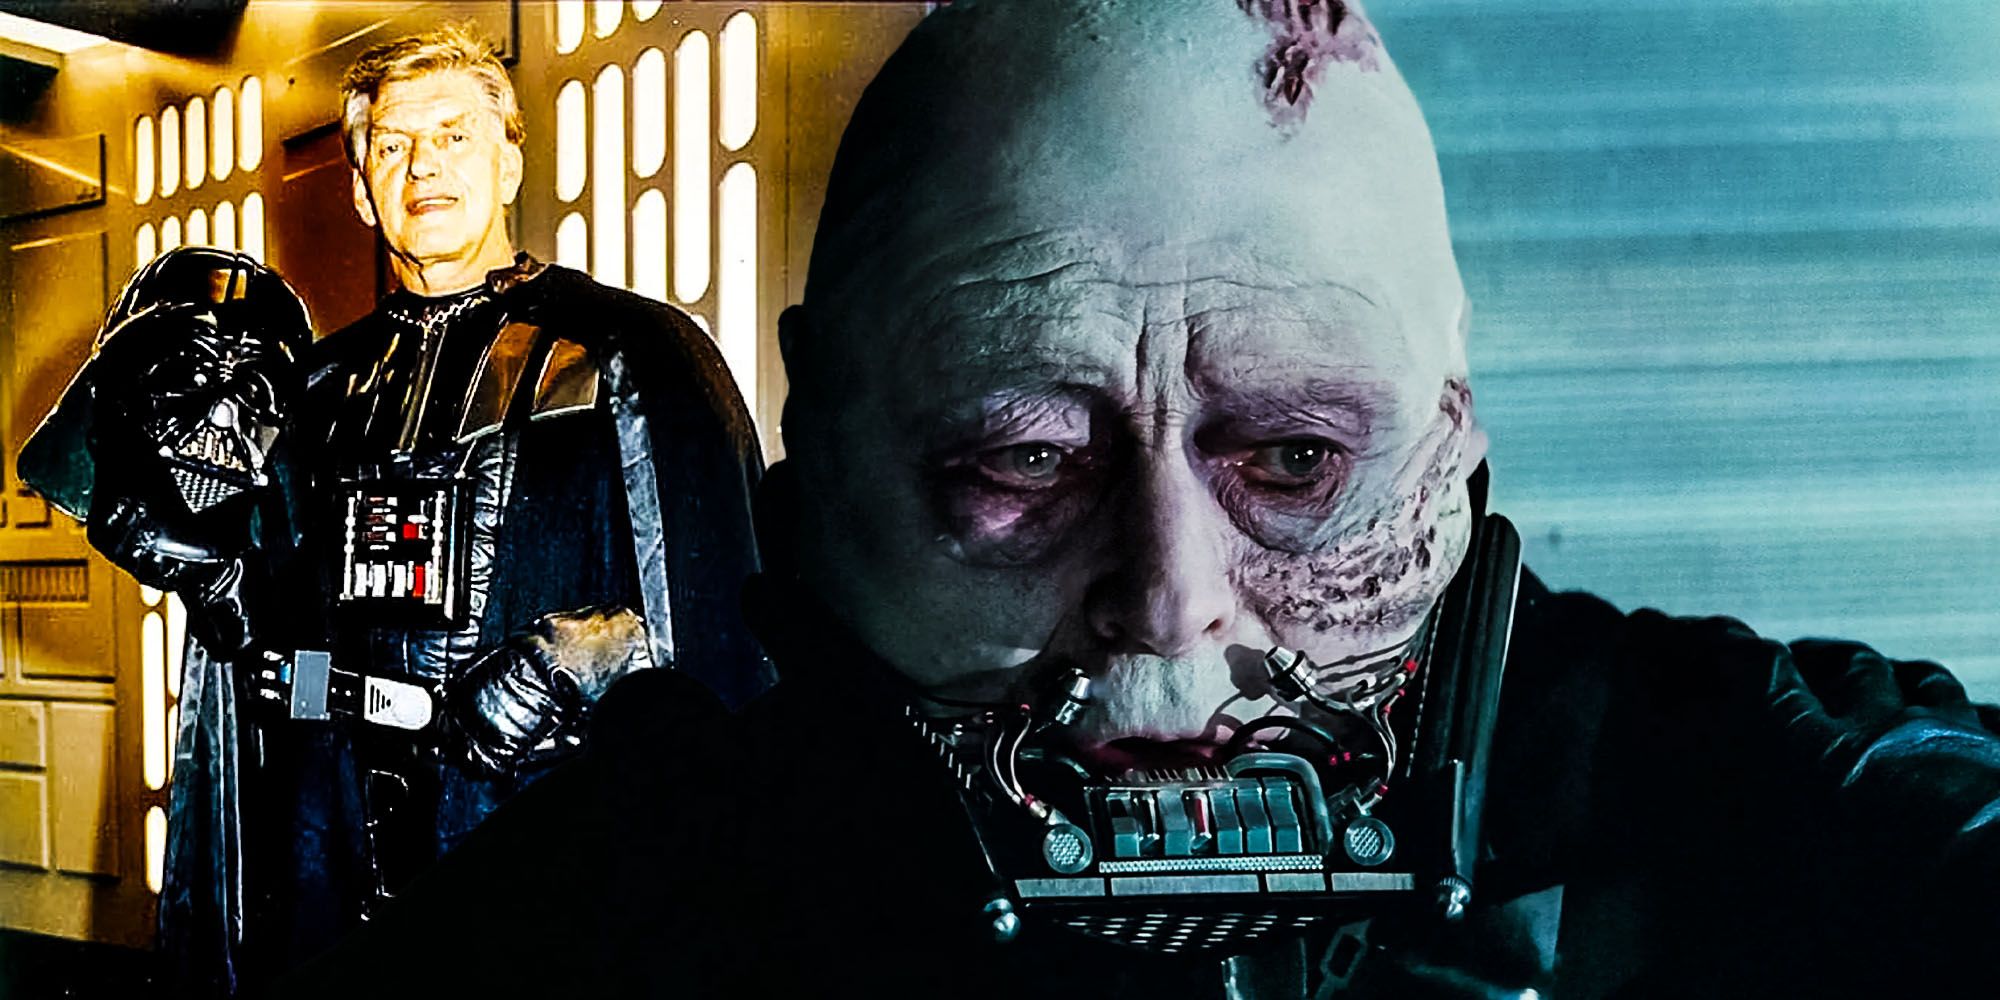 why did george lucas cast a third actor for star wars return of the jedi Sebastian shaw david prowse